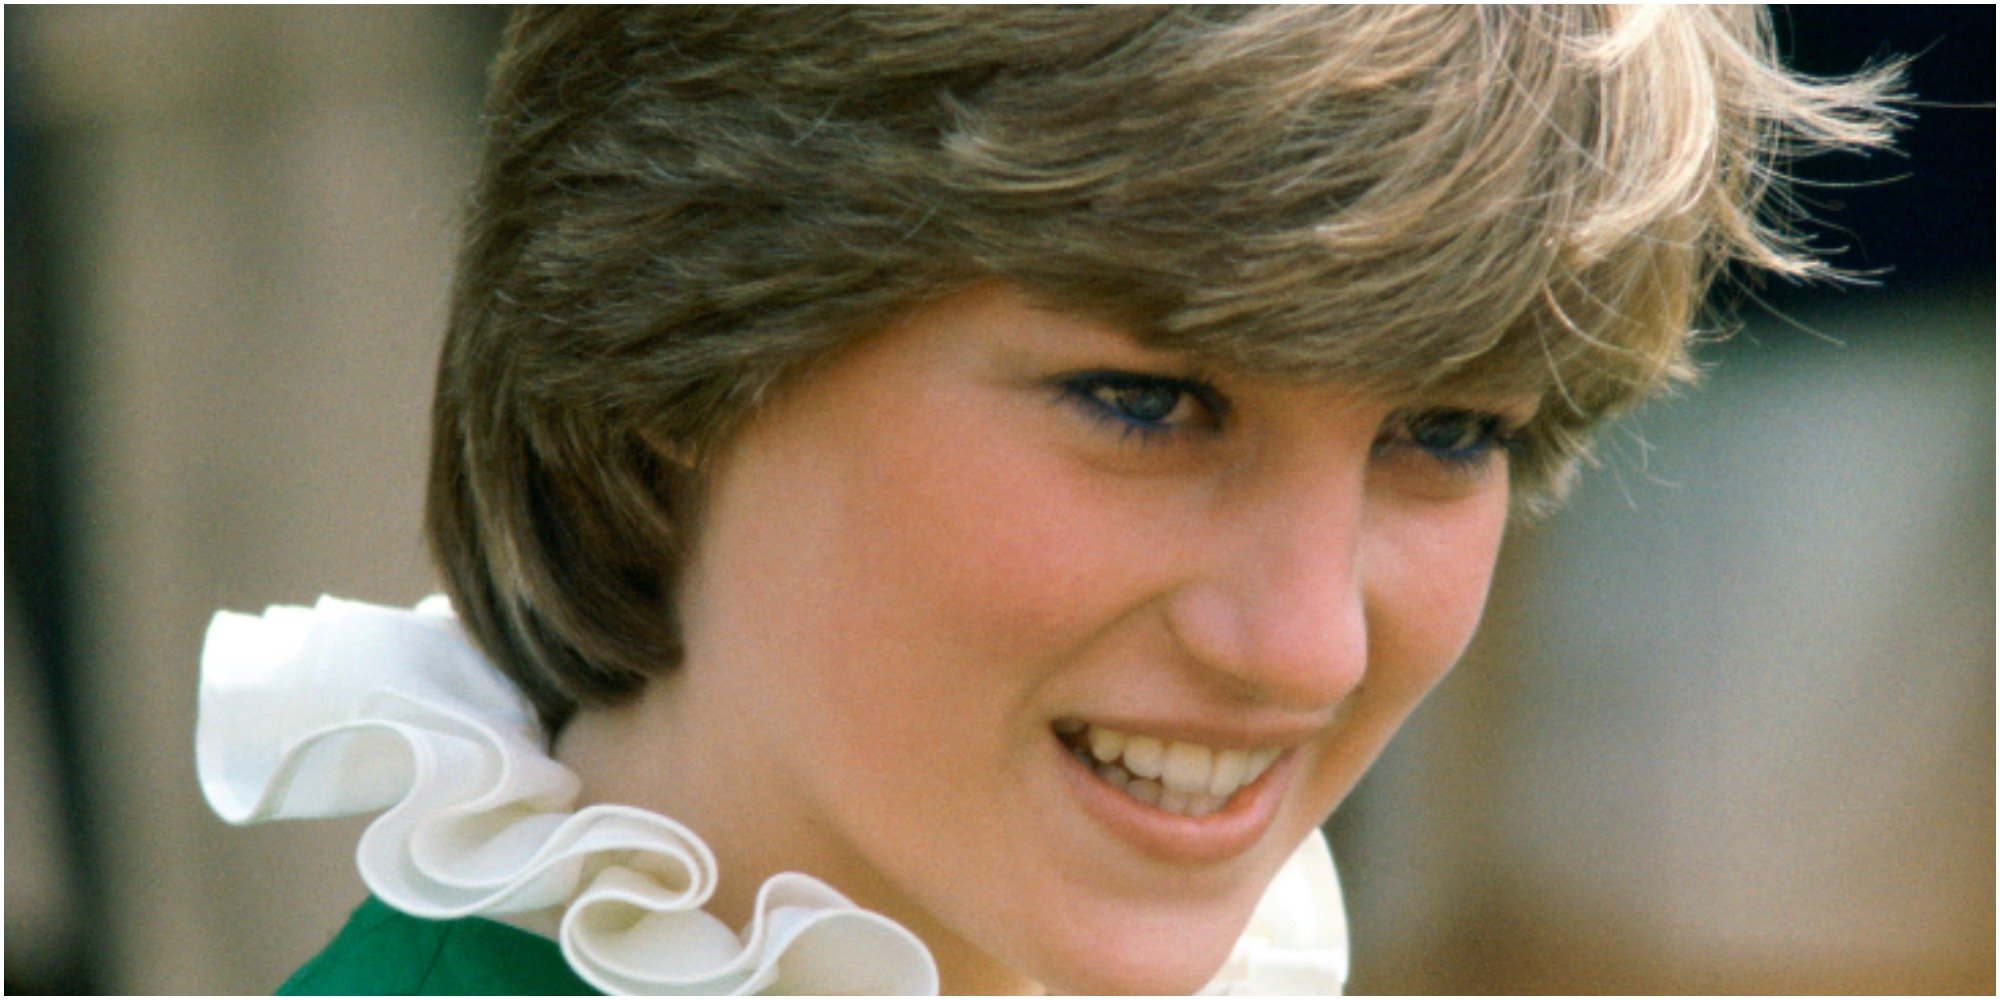 A new Princess Diana documentary paints her as a feminist role model.